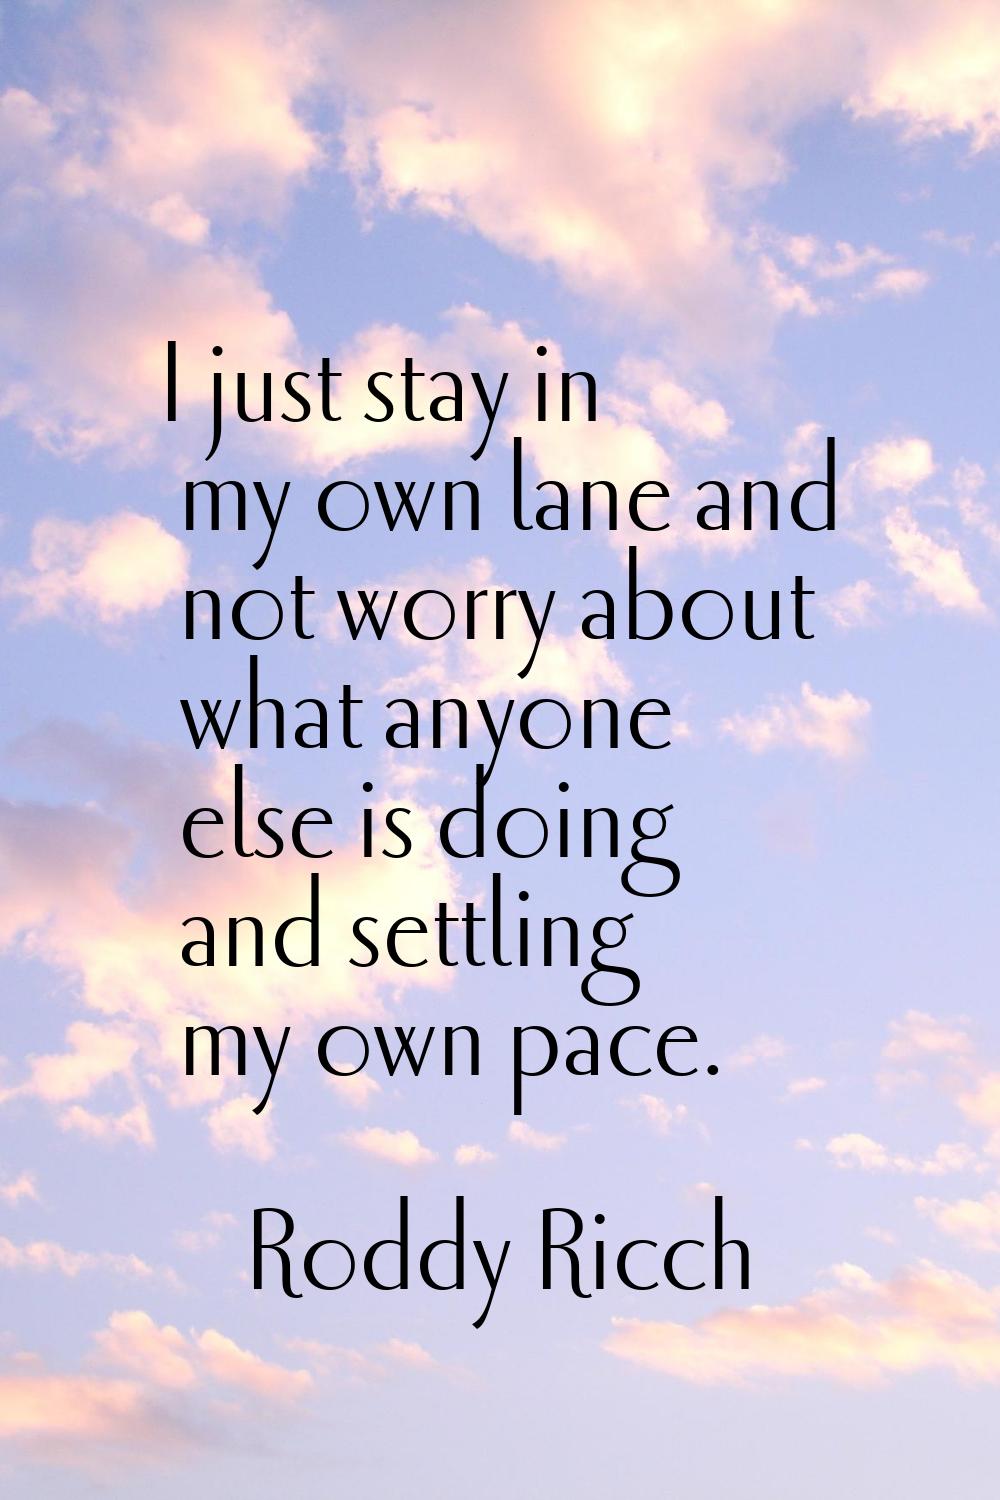 I just stay in my own lane and not worry about what anyone else is doing and settling my own pace.